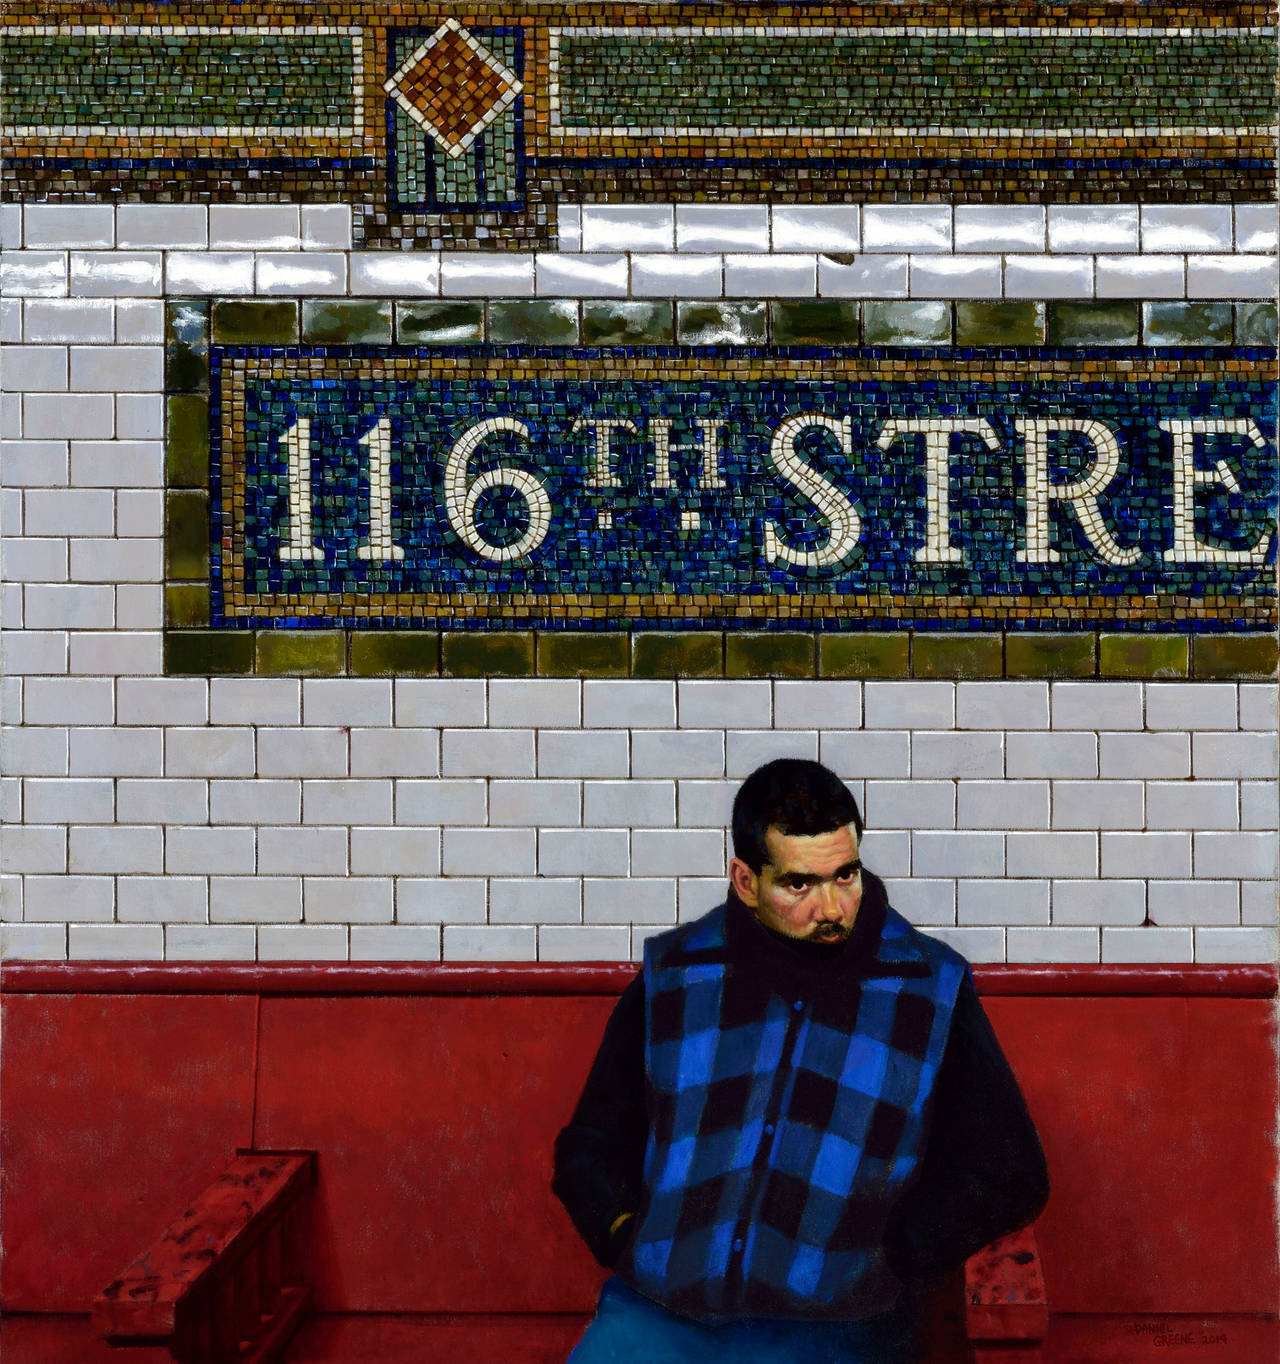 Daniel Greene Figurative Painting - RED BENCH- 116TH STREET, hyper-realism, man in chair, red bench, blue jacket